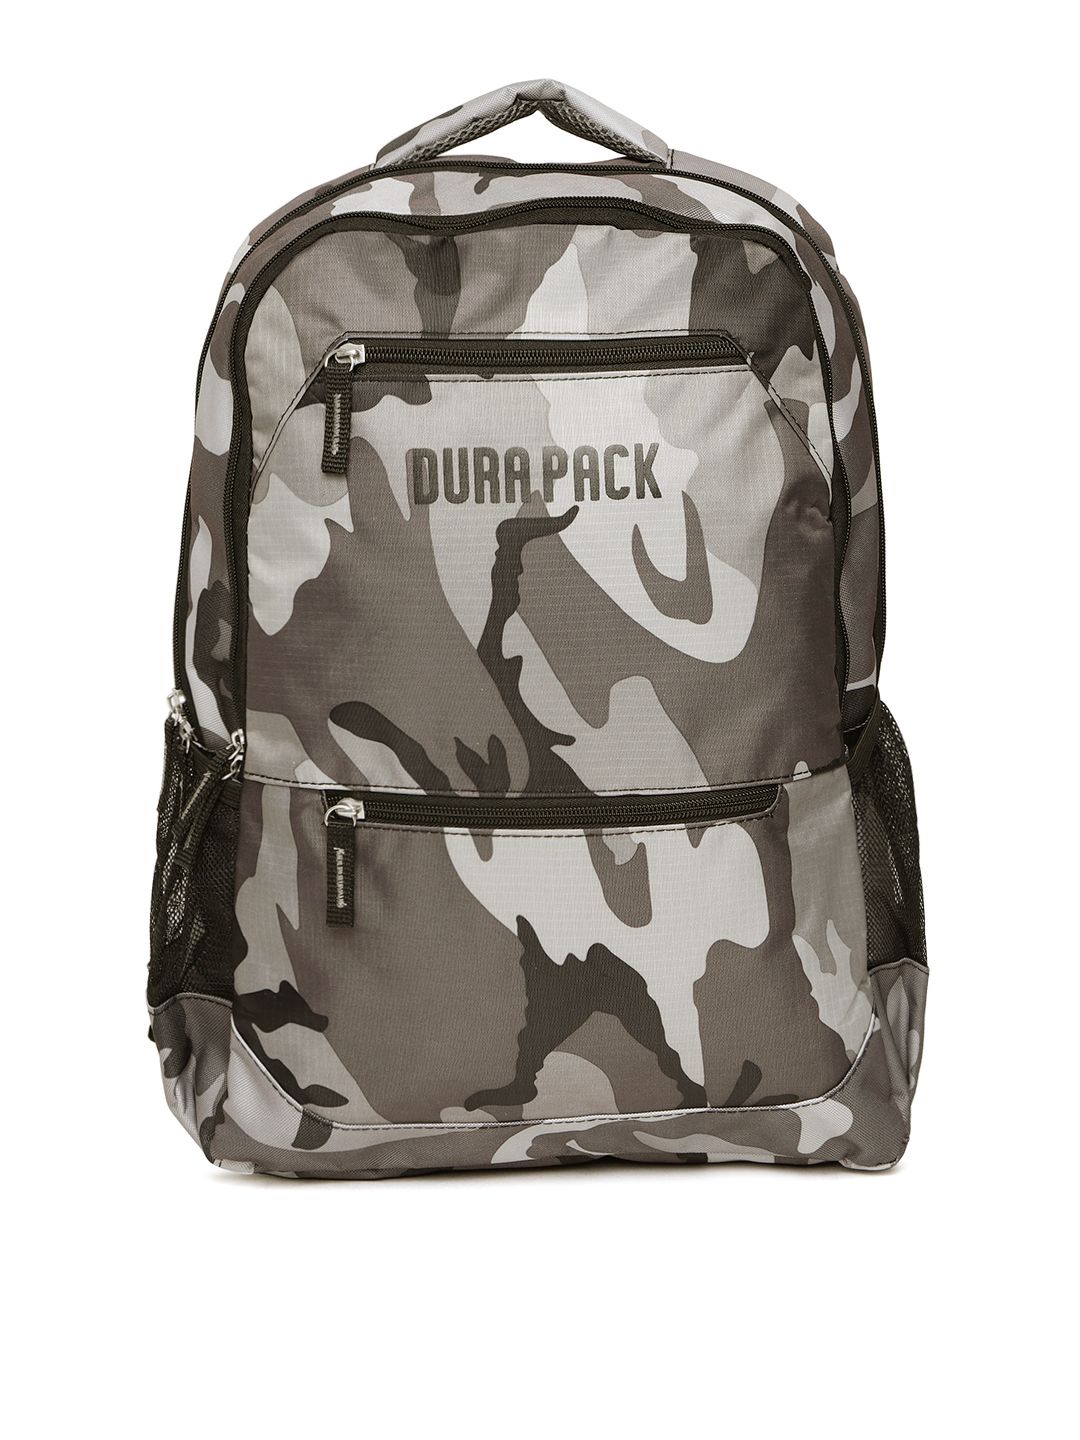 Durapack Unisex Grey & Brown Camouflage Print Backpack Price in India